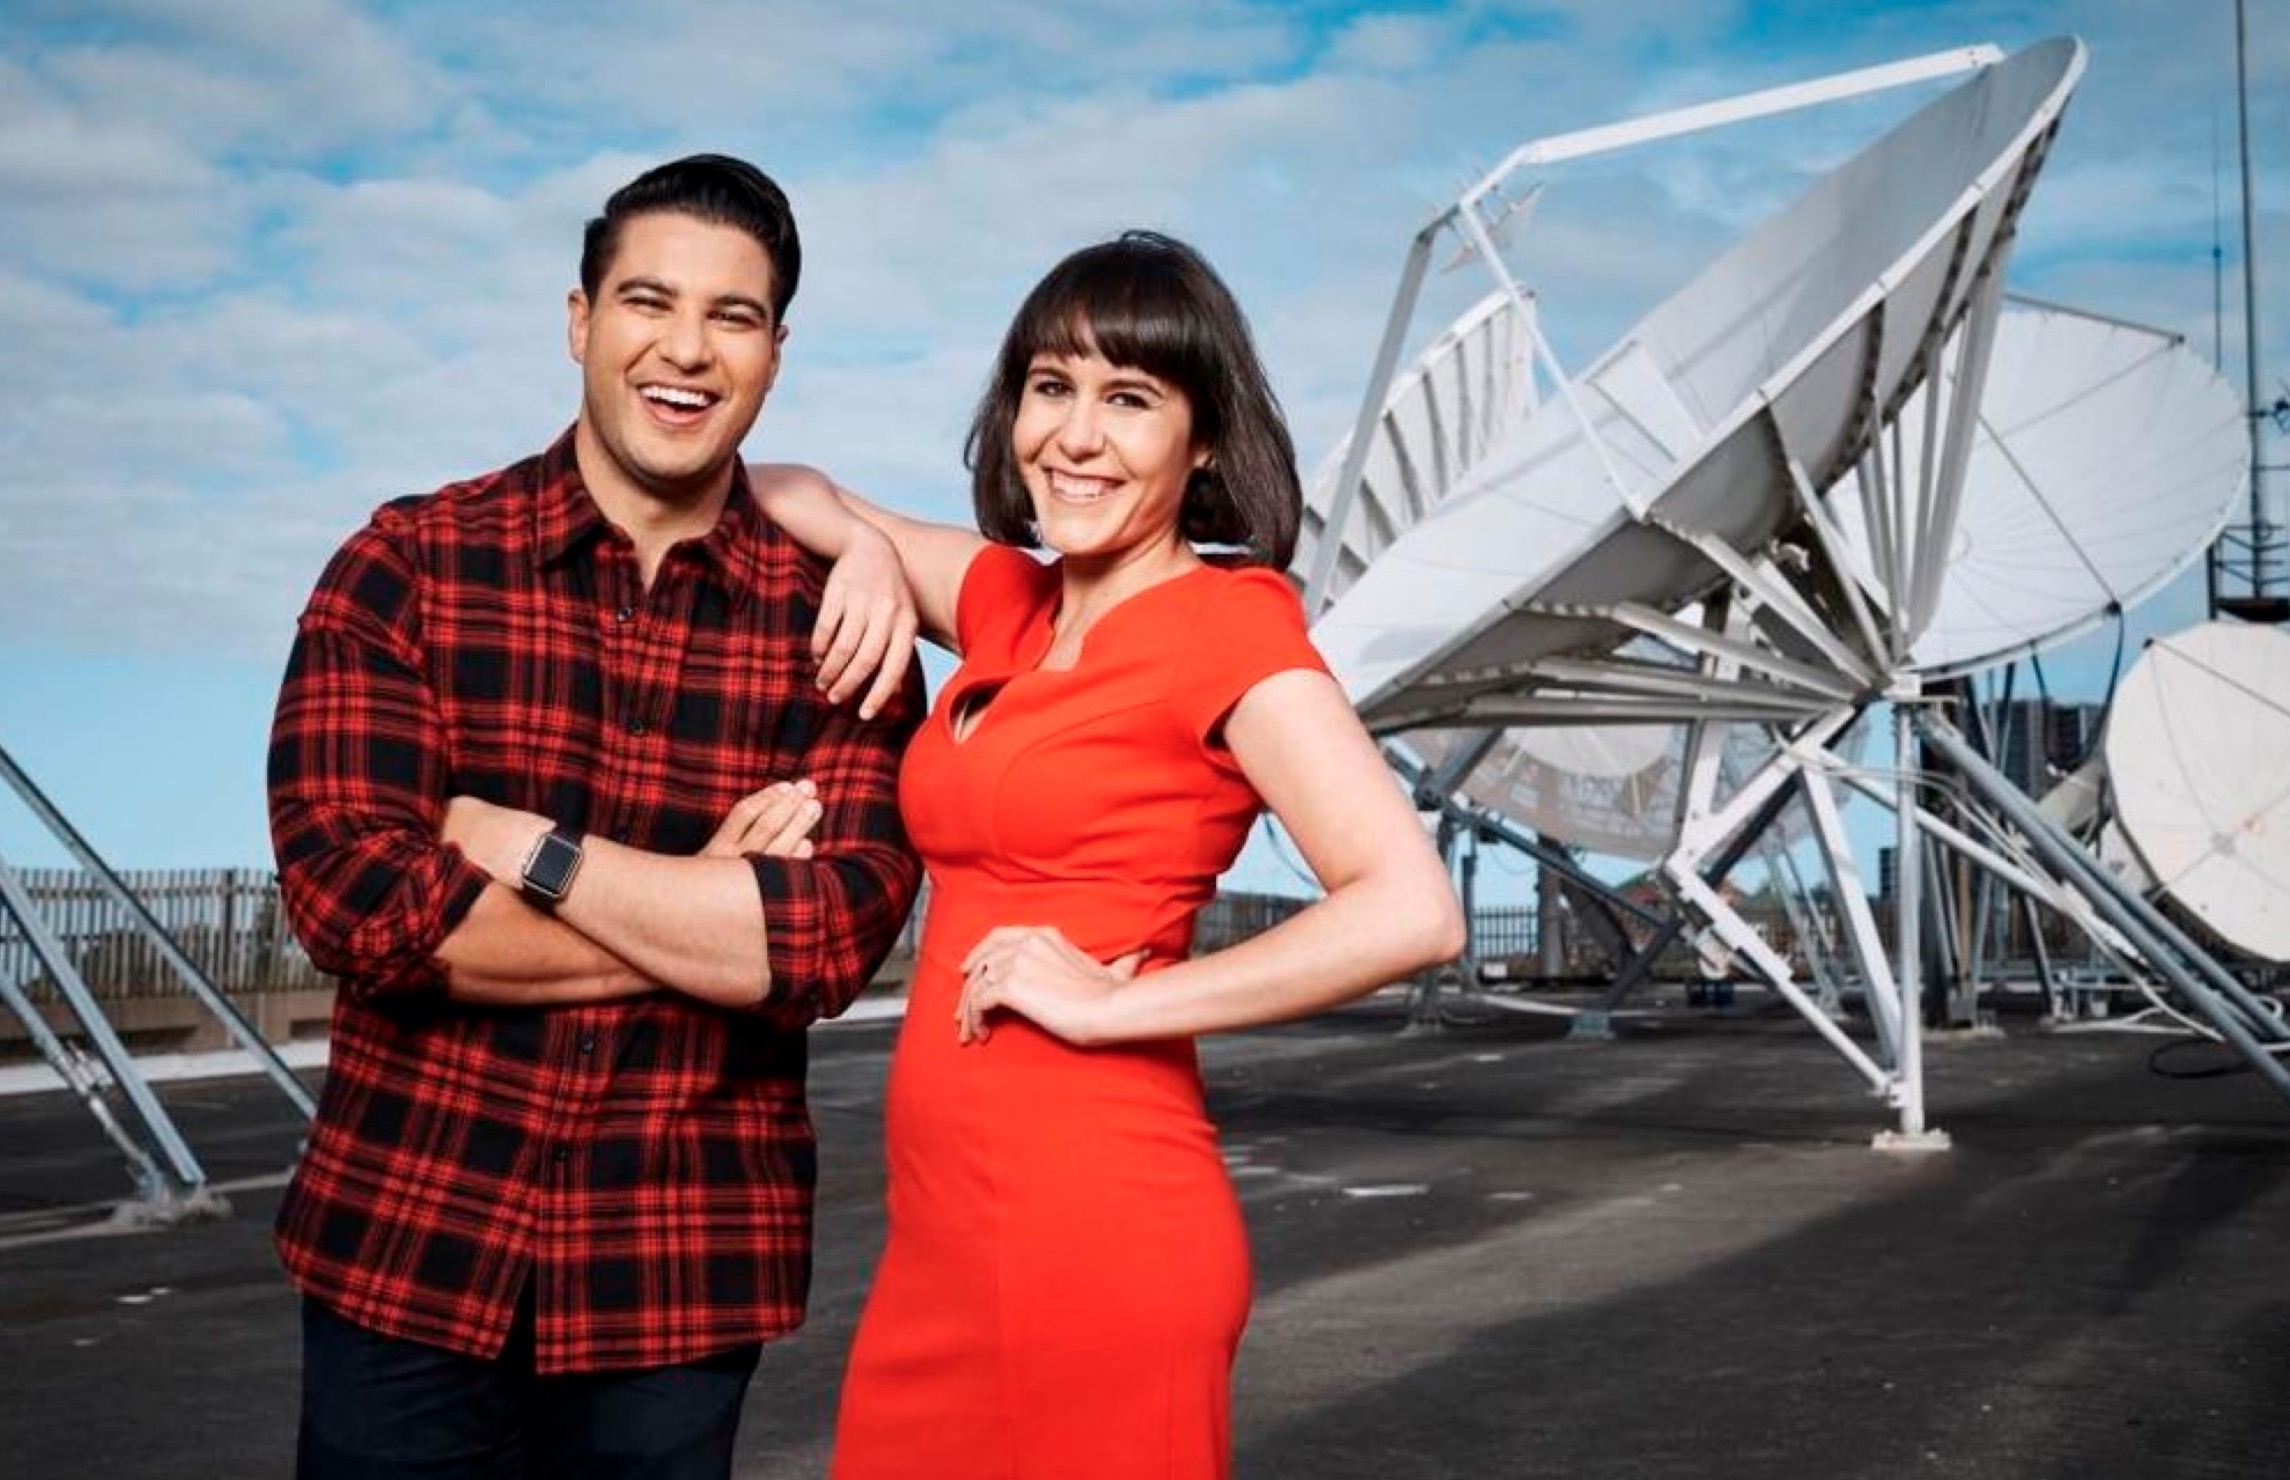   The Feed co-hosts Marc Fennell and Jeannette Francis  image source - SBS 